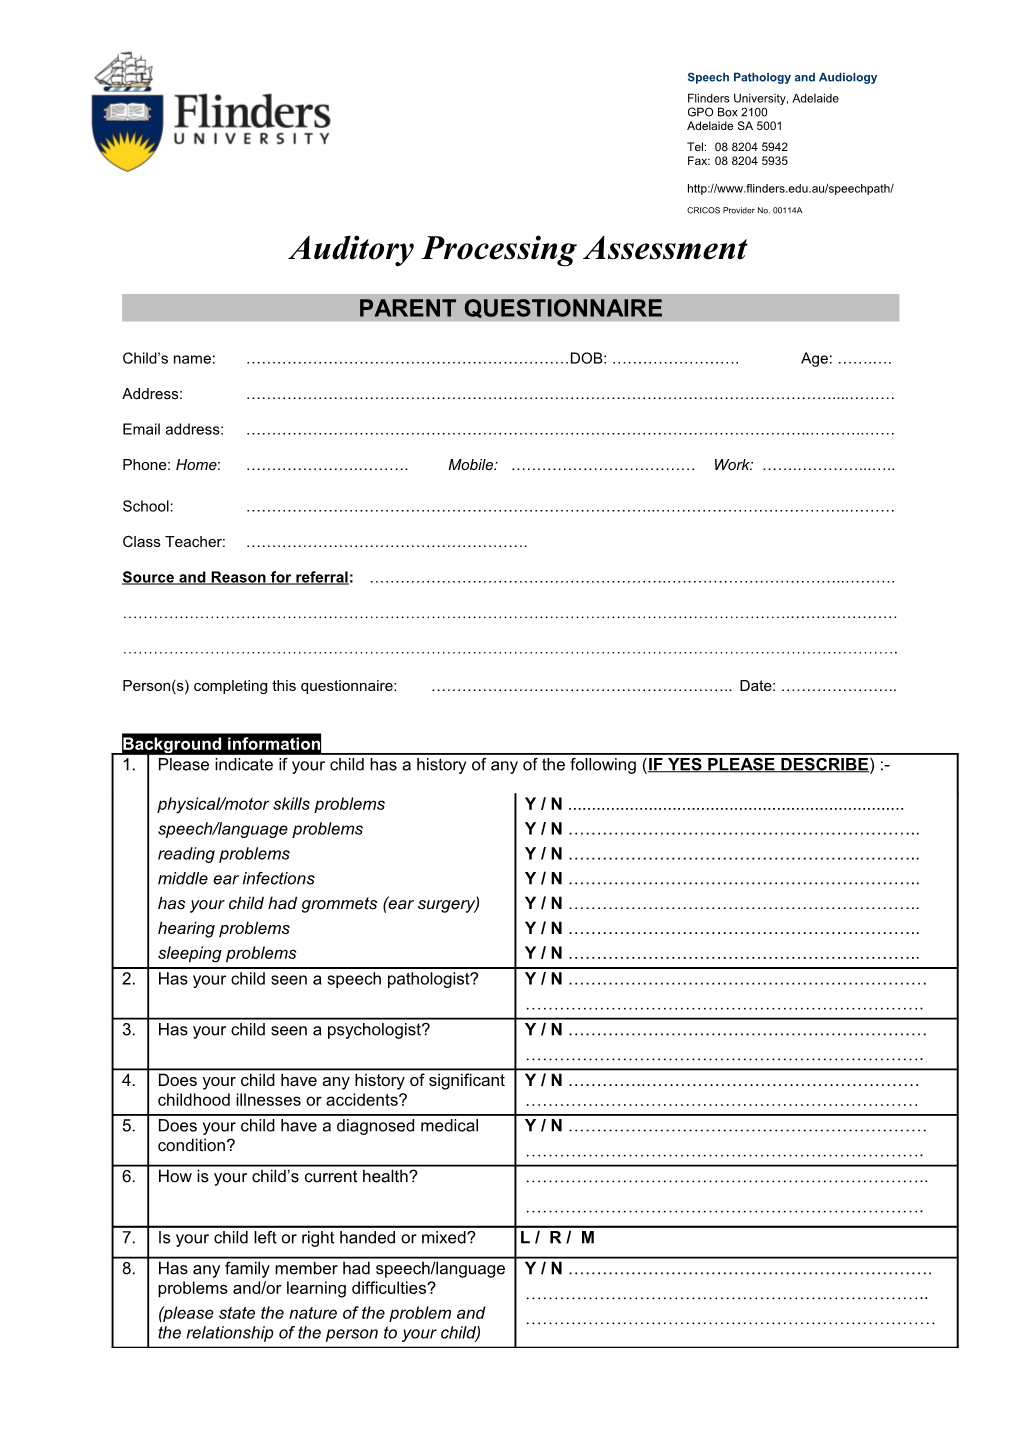 Auditory Processing Assessment